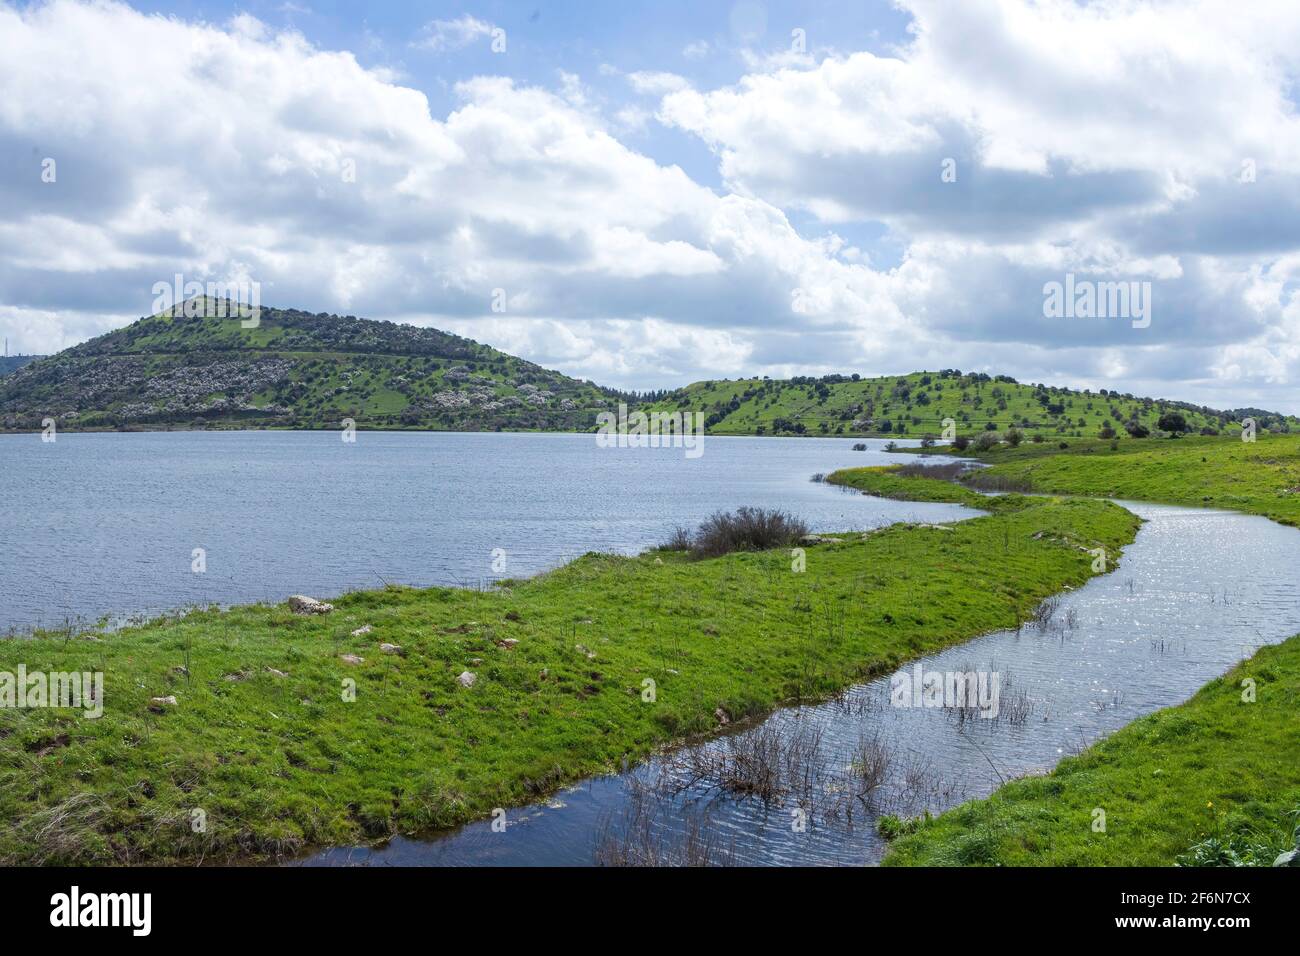 An artificial lake with a hill on the horizon Stock Photo